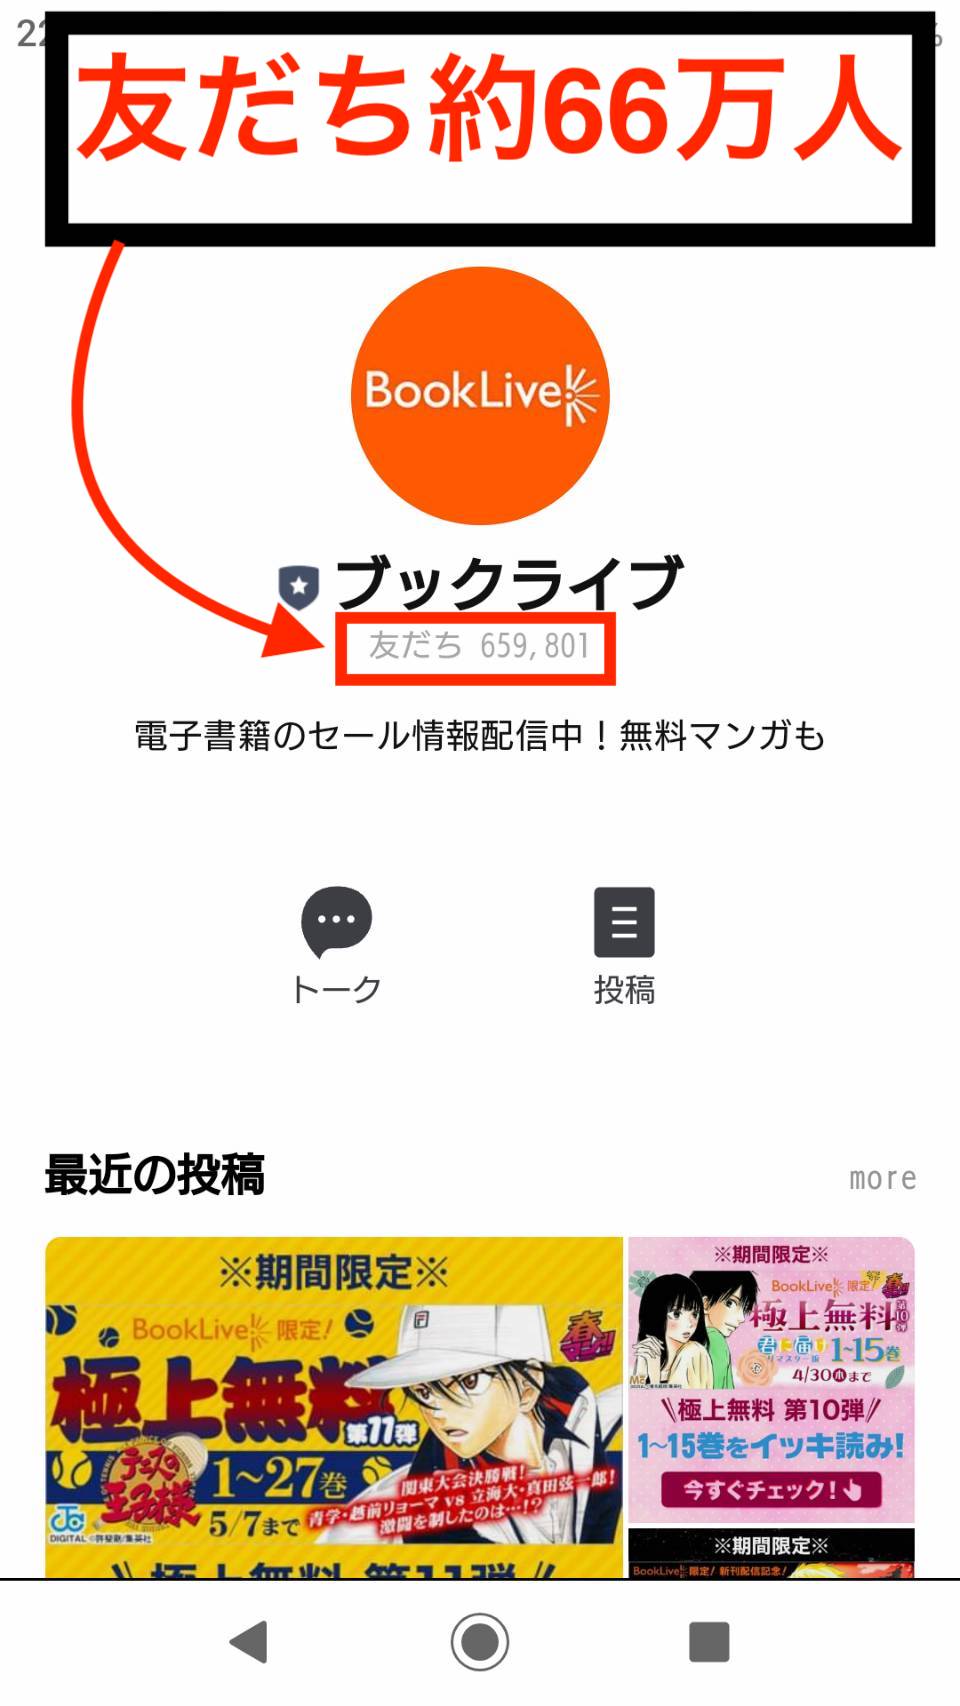 BookLive 公式LINE 友だち人数